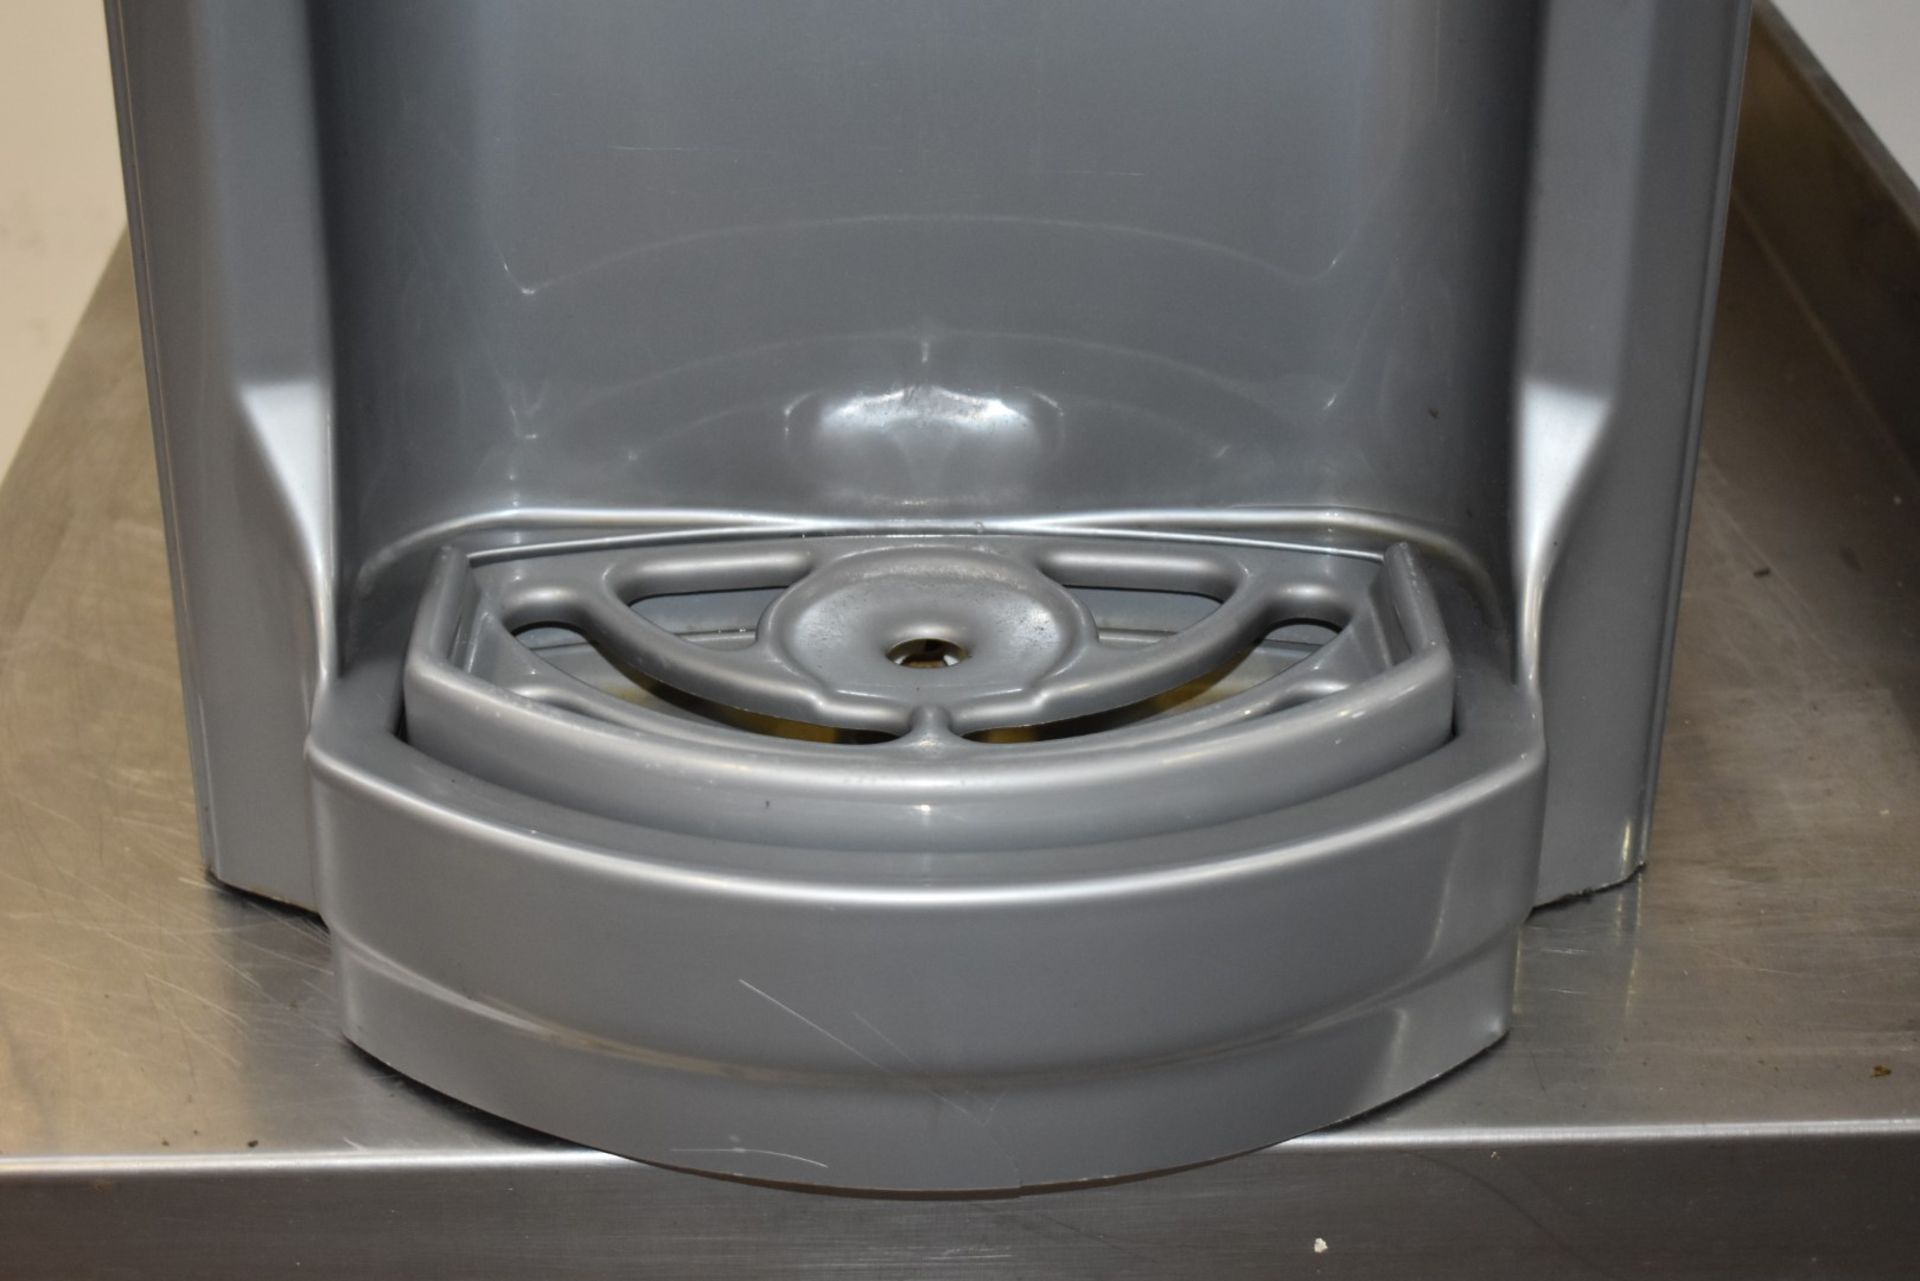 1 x Scotsman Countertop Water and Ice Dispenser - 230v - Model  TCL180-9 - Ref CB109 - CL232 - H86 x - Image 5 of 8